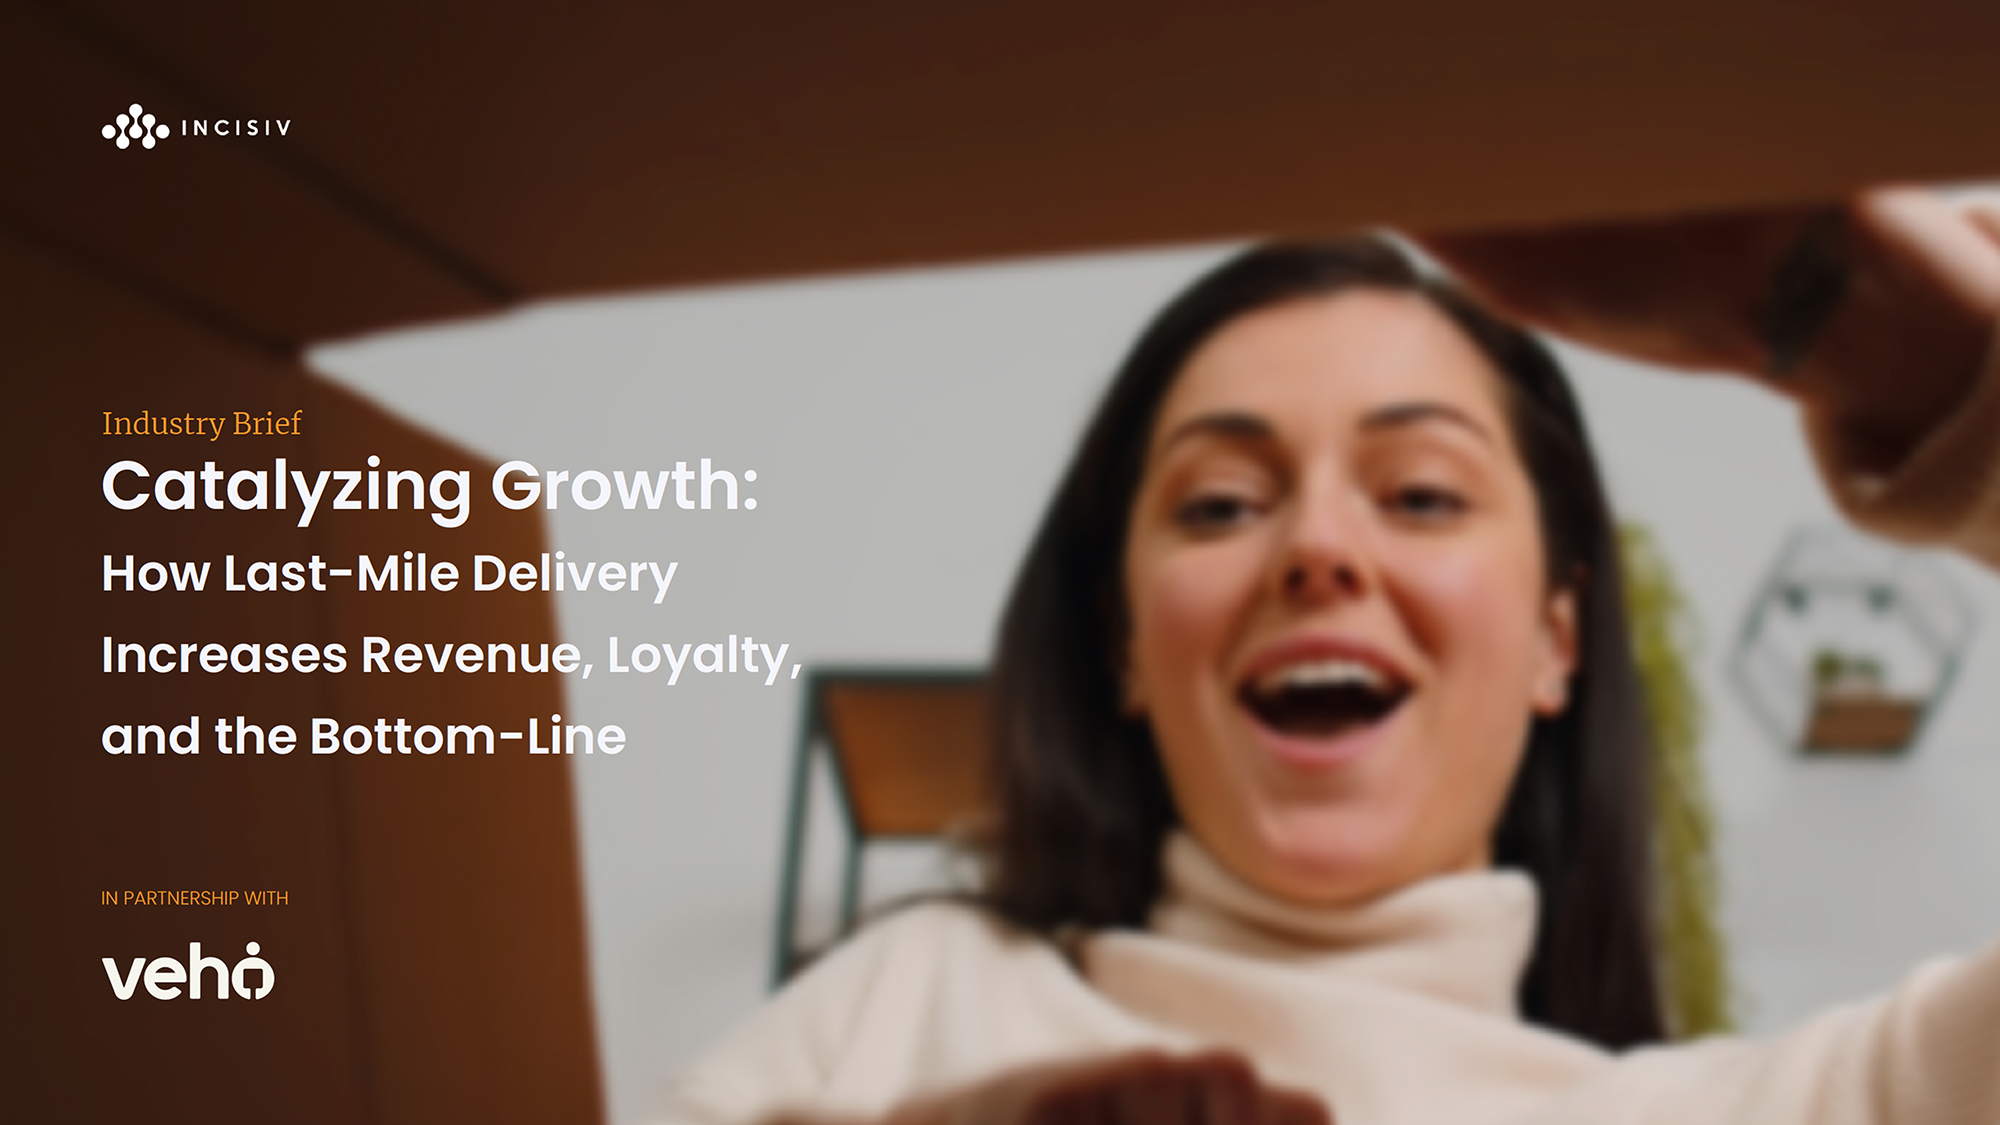 Catalyzing Growth: How Last-Mile Delivery Increase Revenue, Loyalty, and the Bottom-Line